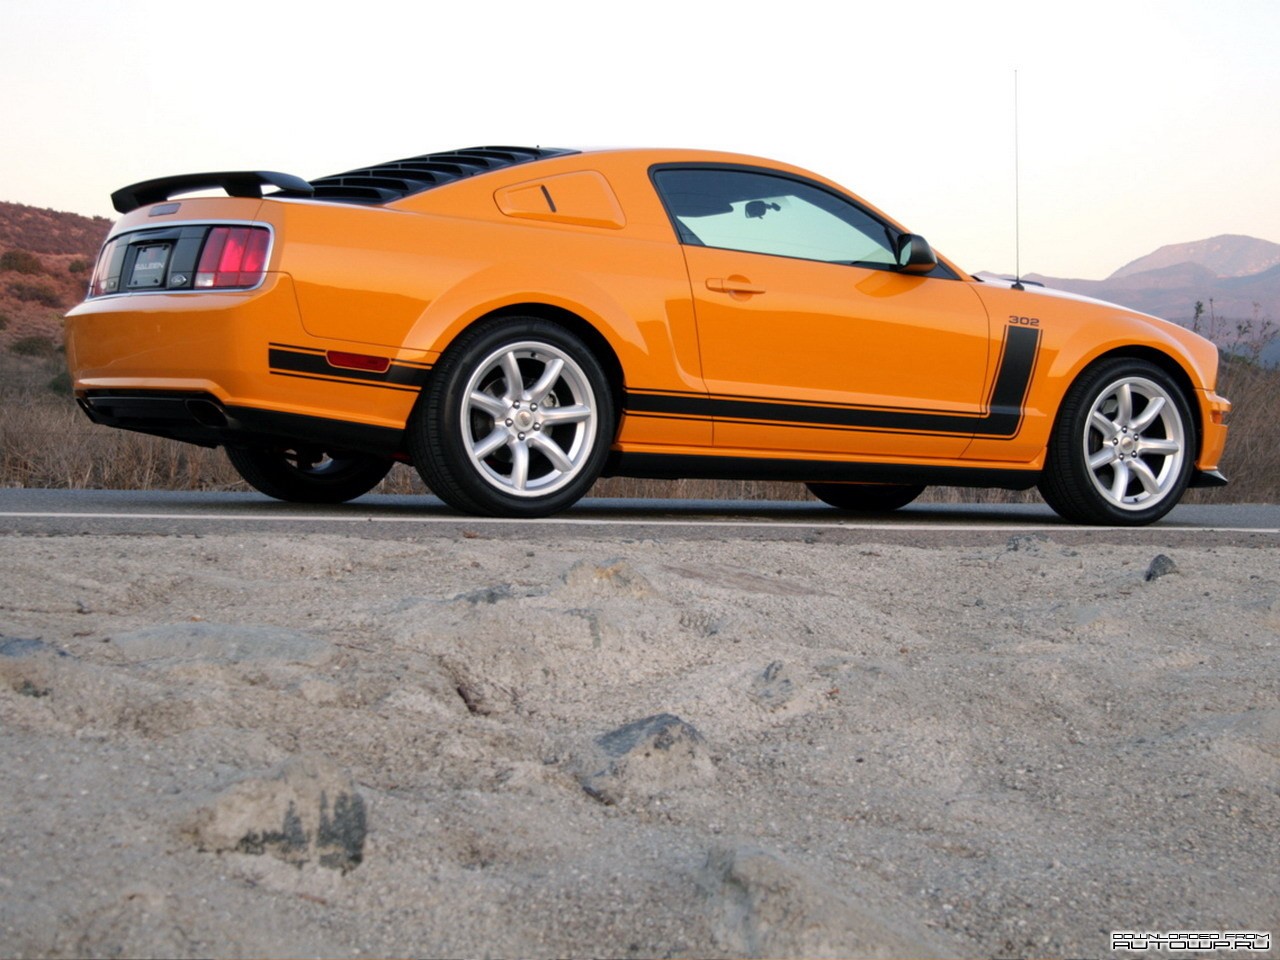 General 1280x960 car vehicle orange cars Ford Ford Mustang muscle cars American cars